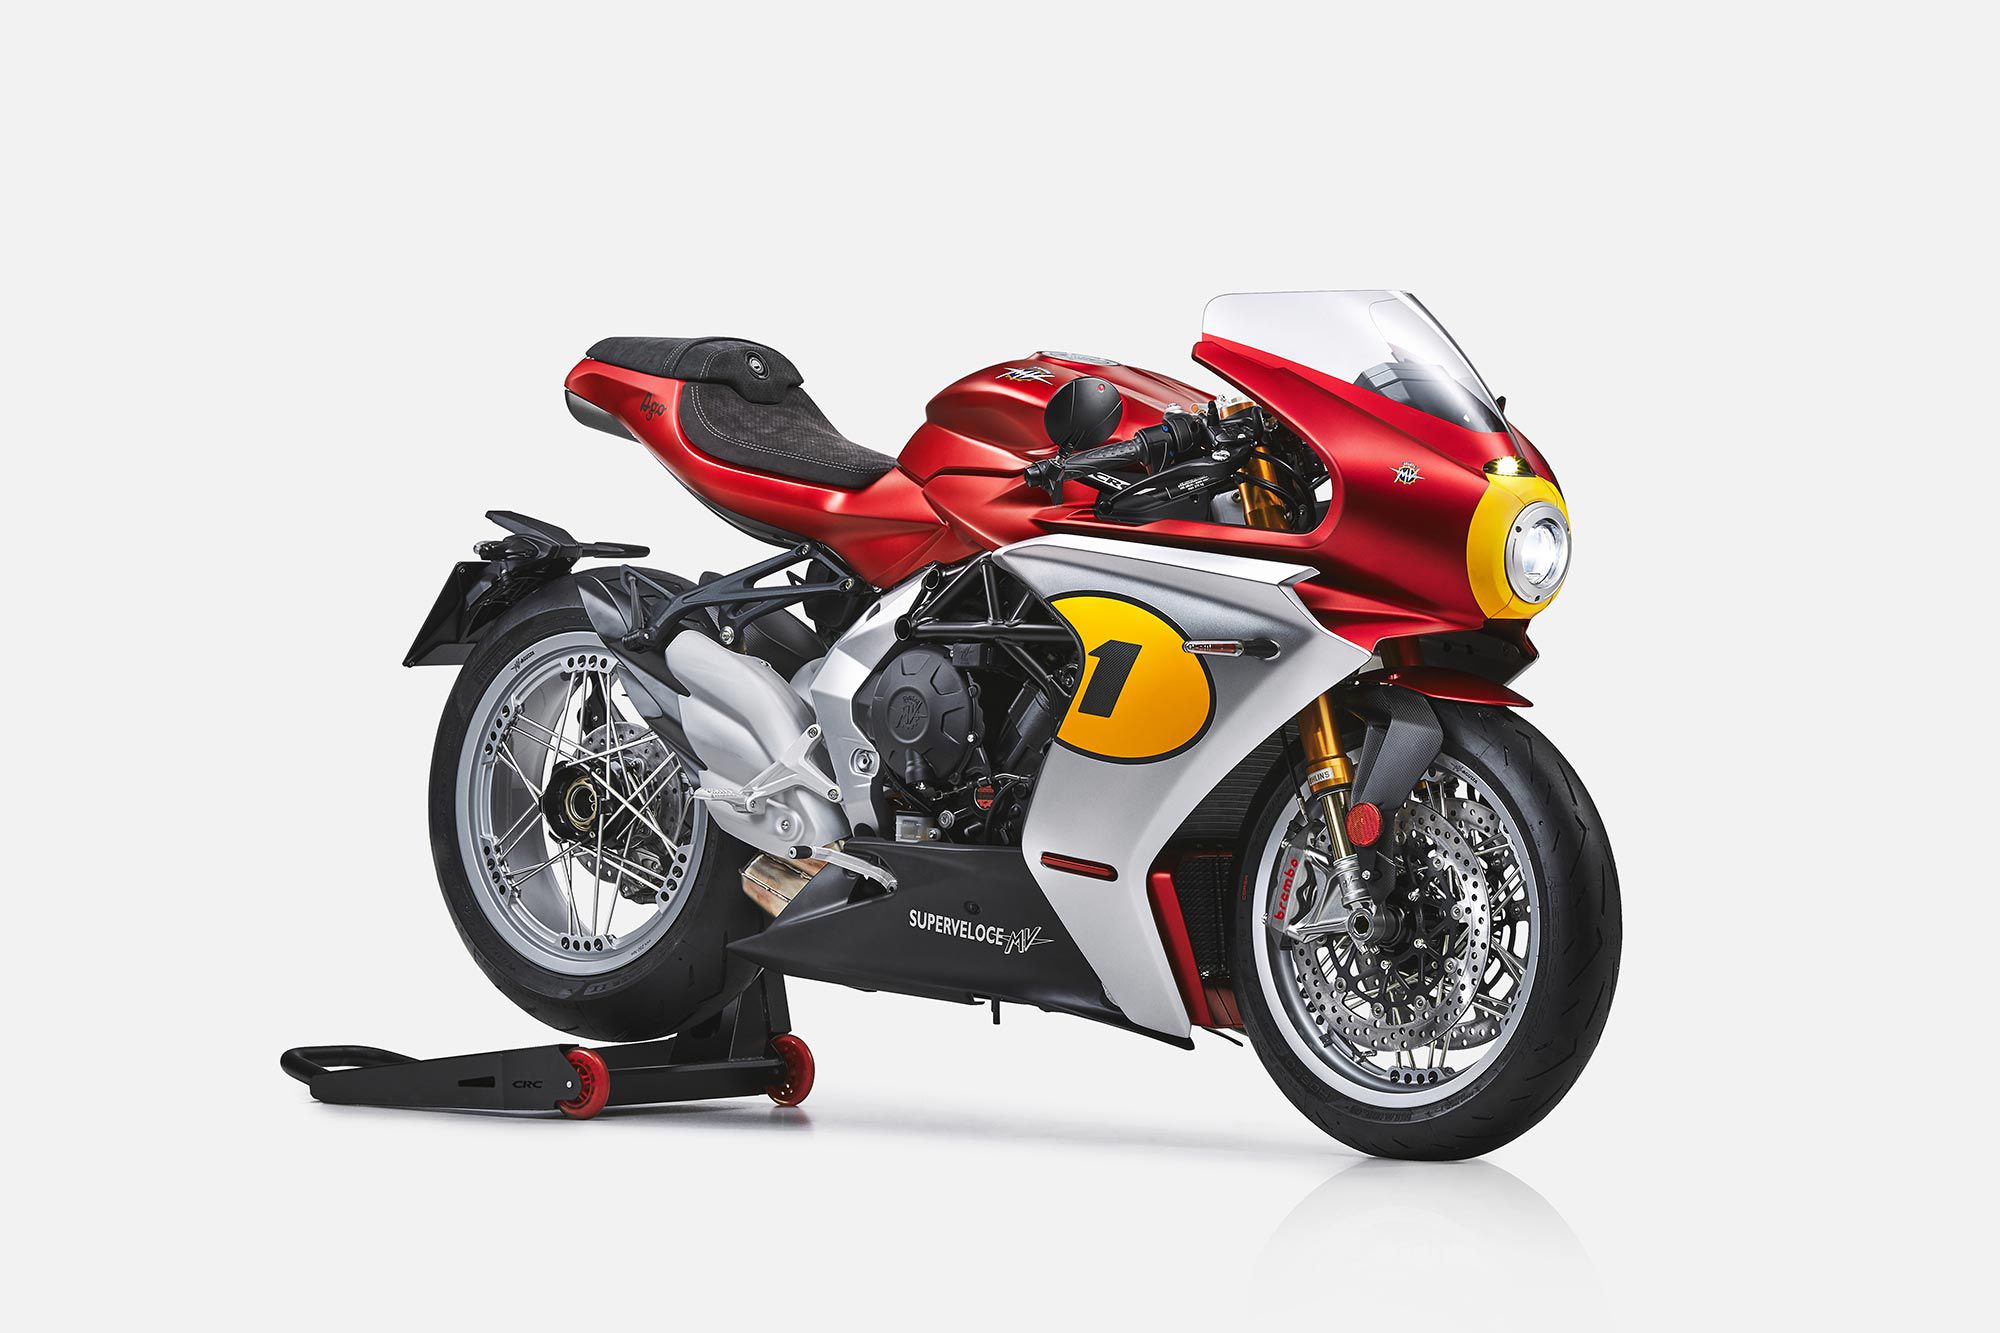 A side view of the MV Agusta Superveloce Ago